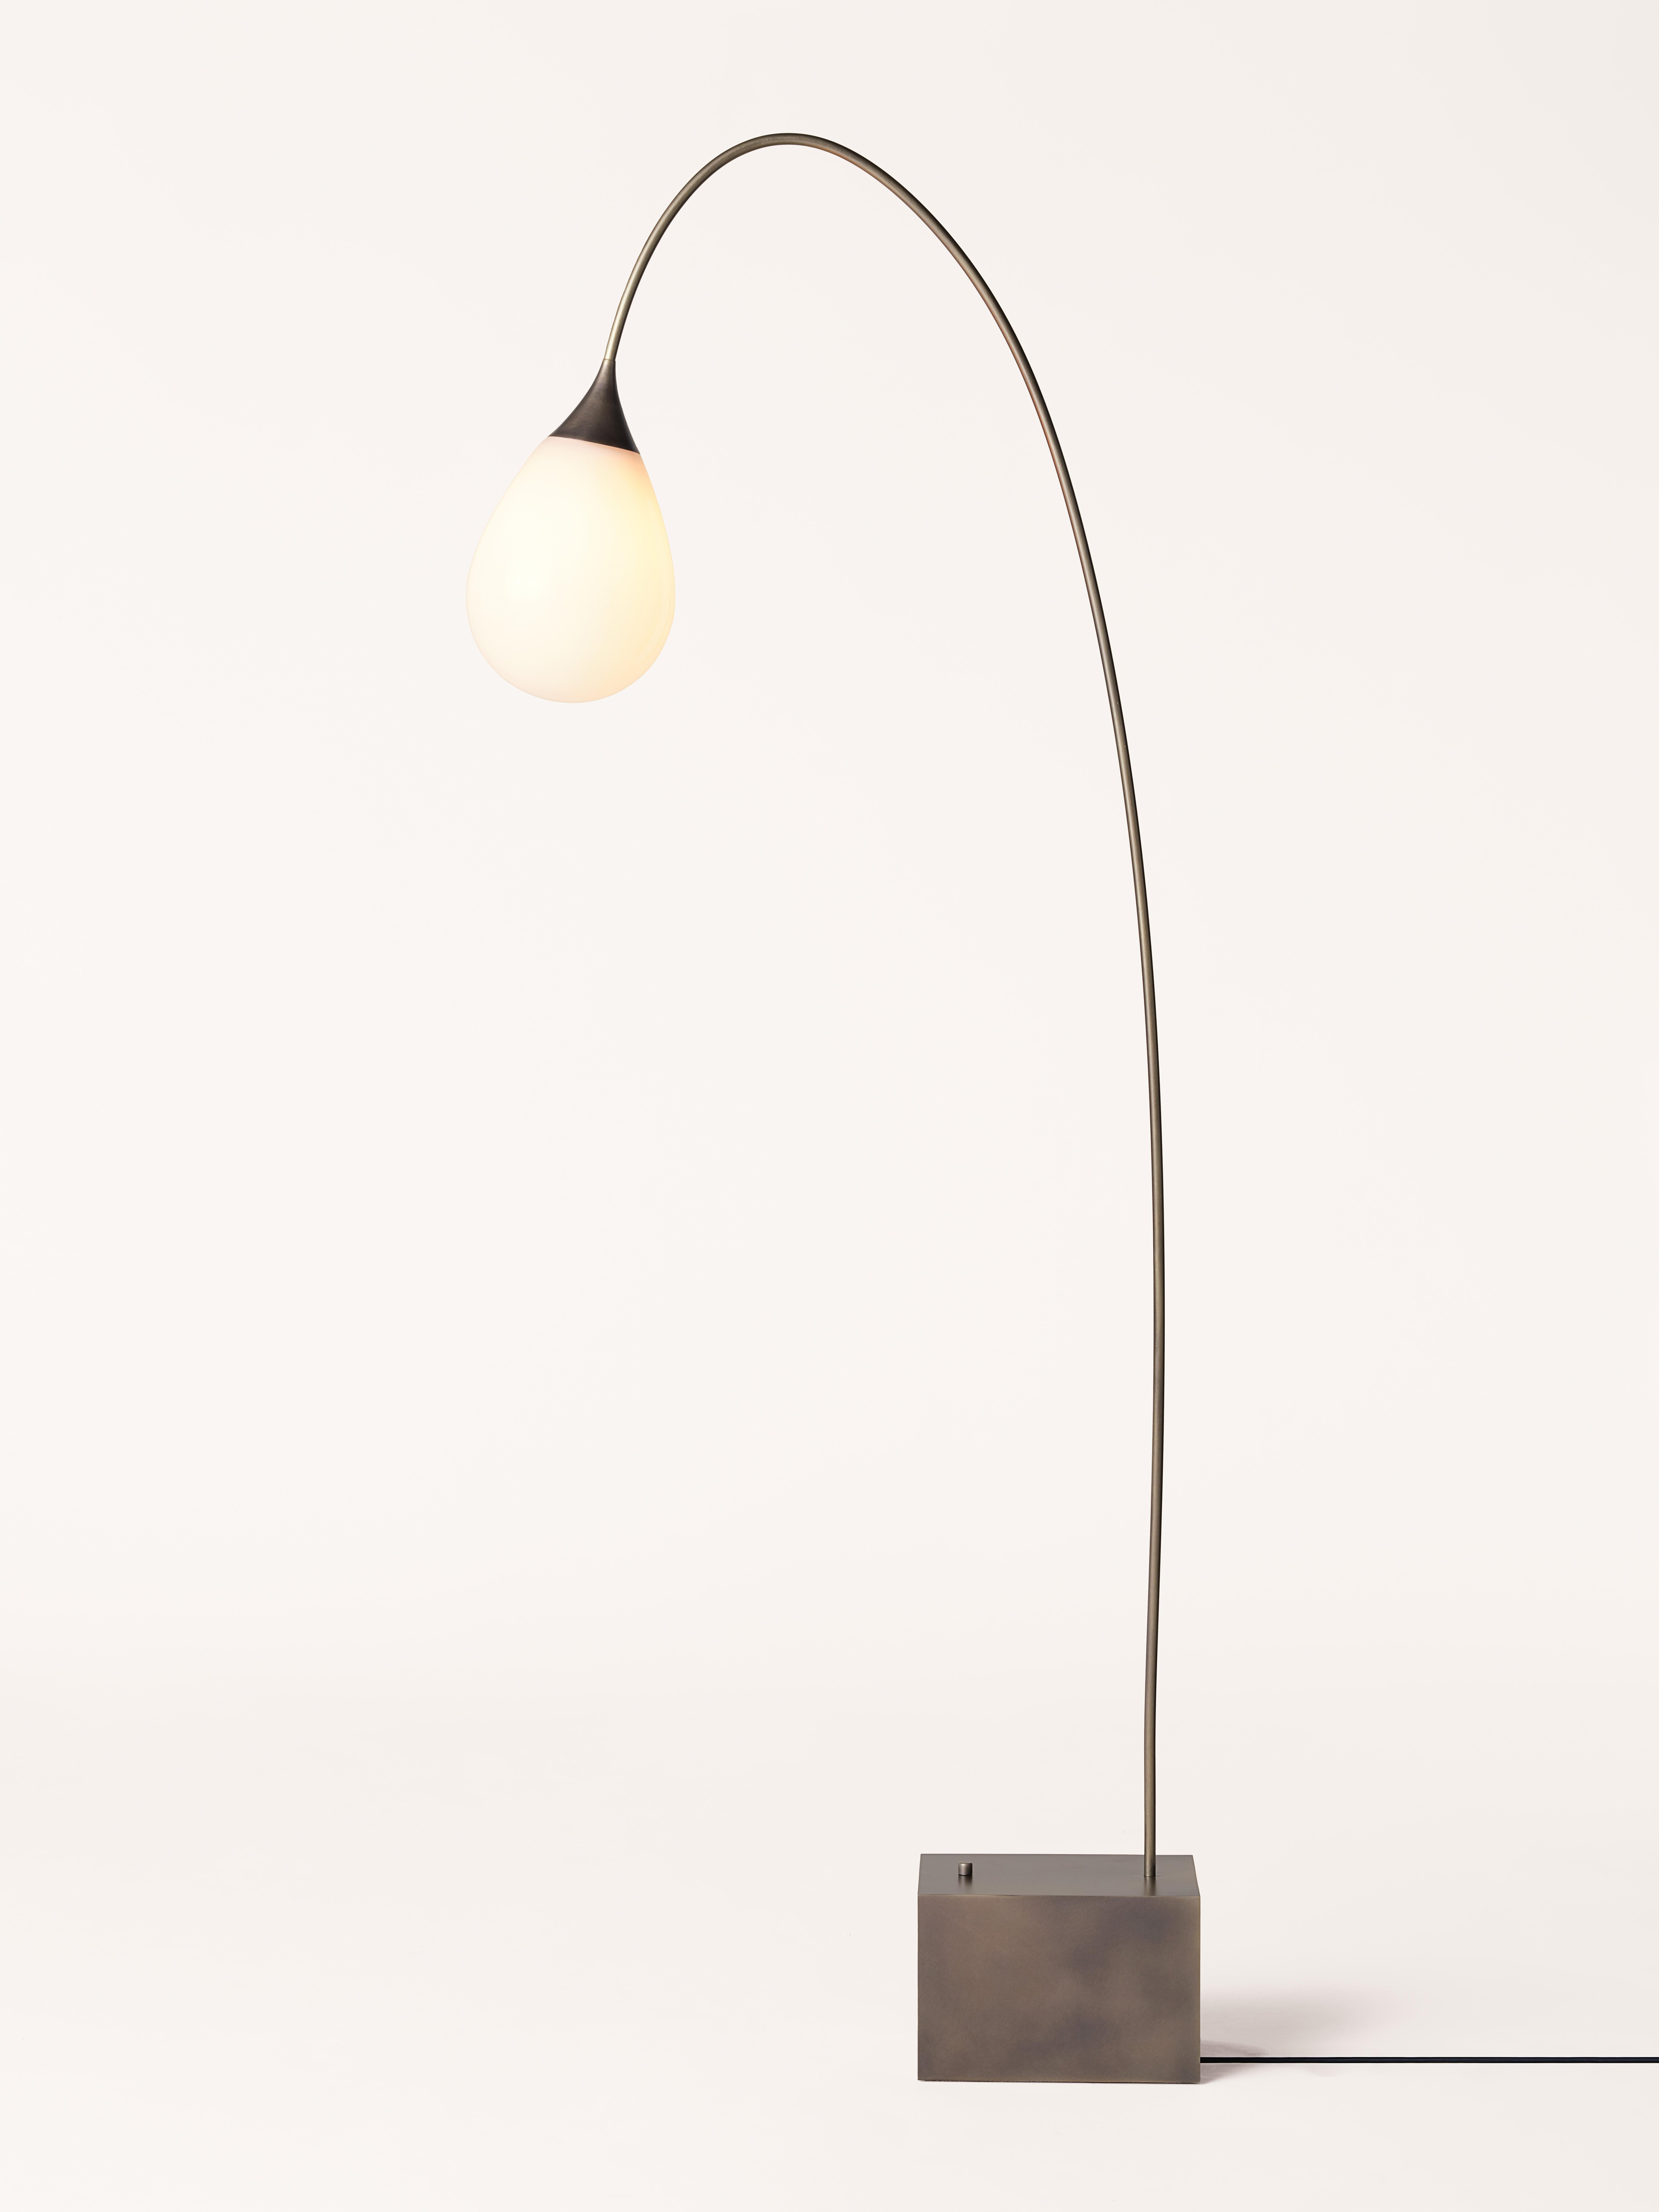 A hand-blown glass pendant hangs from a spun brass cone and an elegant, arcing curve. A rectangular base grounds the lamp, featuring a dimmer knob to control the luminescent glow.

Available in a variety of finishes.

Overall dimensions: 31